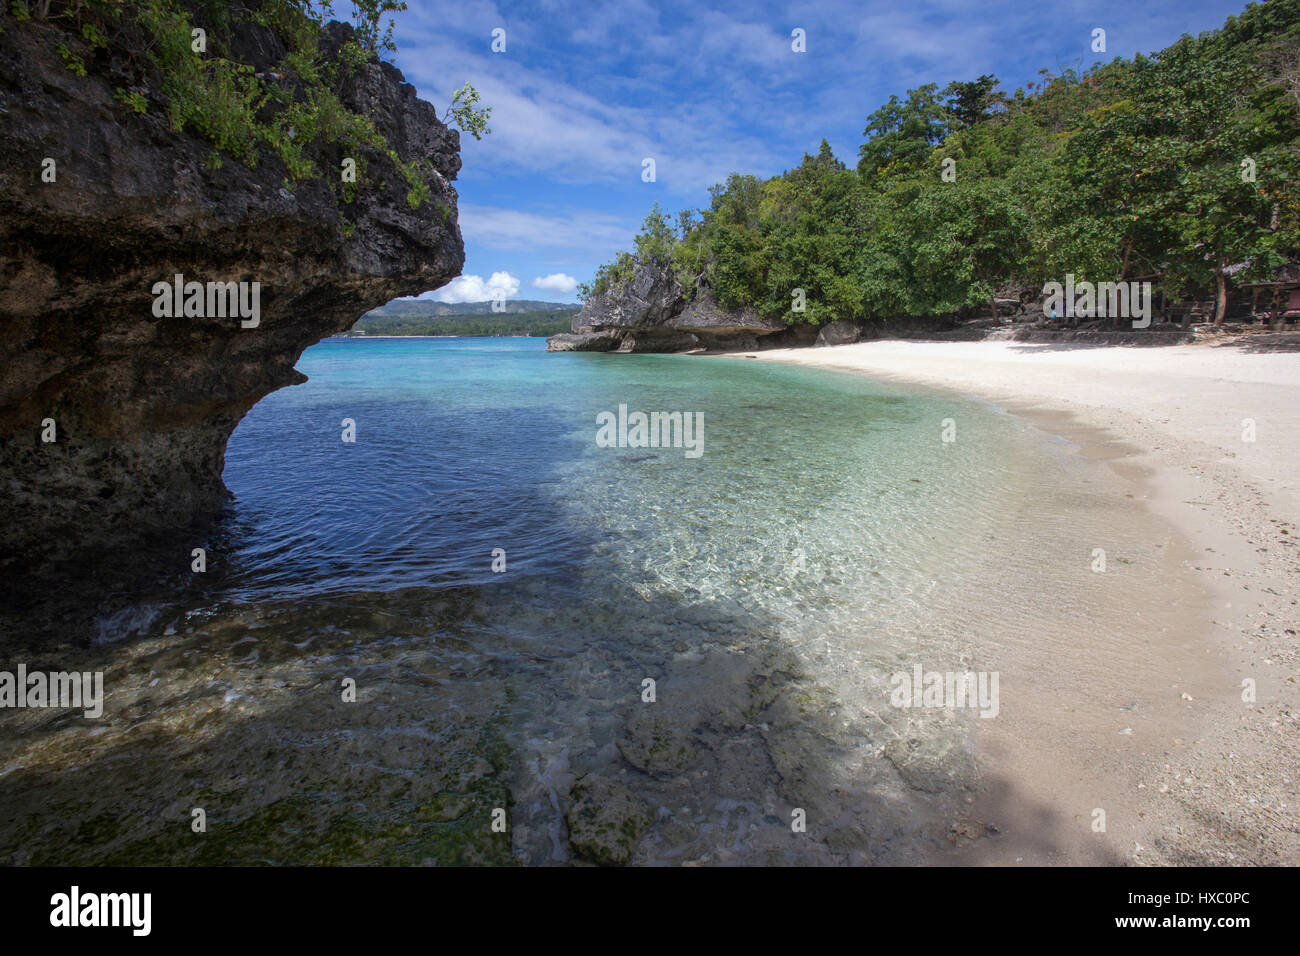 Salagdoong Beach is one of †the most popular beaches on Siquijor Island. This white sand beach located near the town of Maria is enclosed by a rocky h Stock Photo